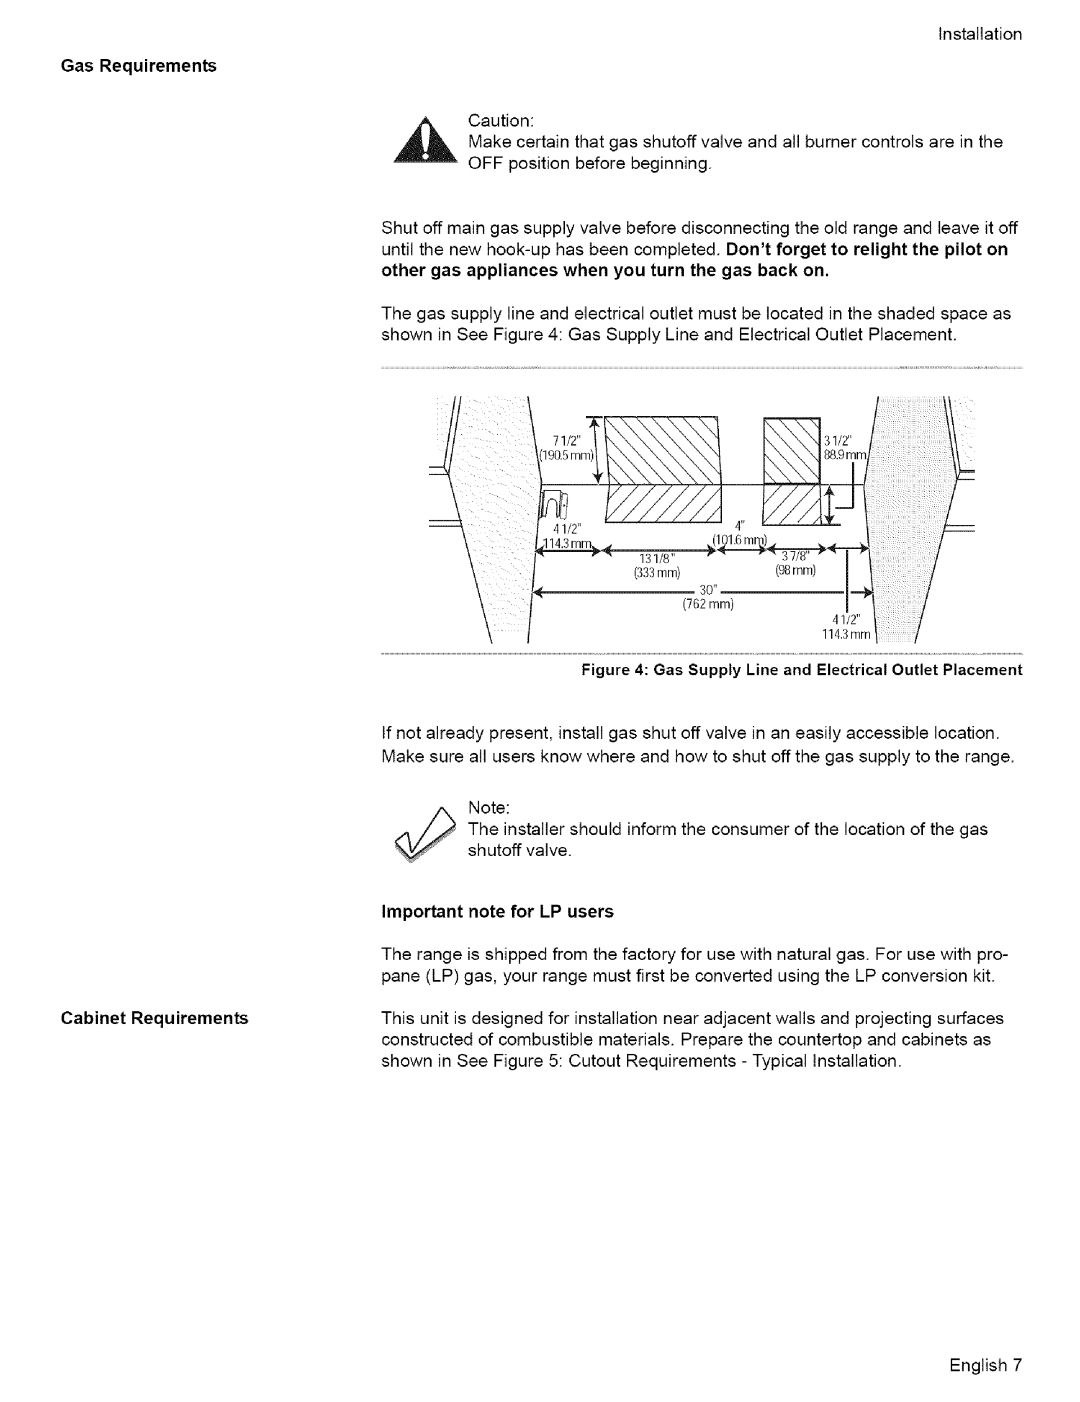 Bosch Appliances L0609466 manual Gas Requirements, Important note for LP users, Cabinet Requirements 